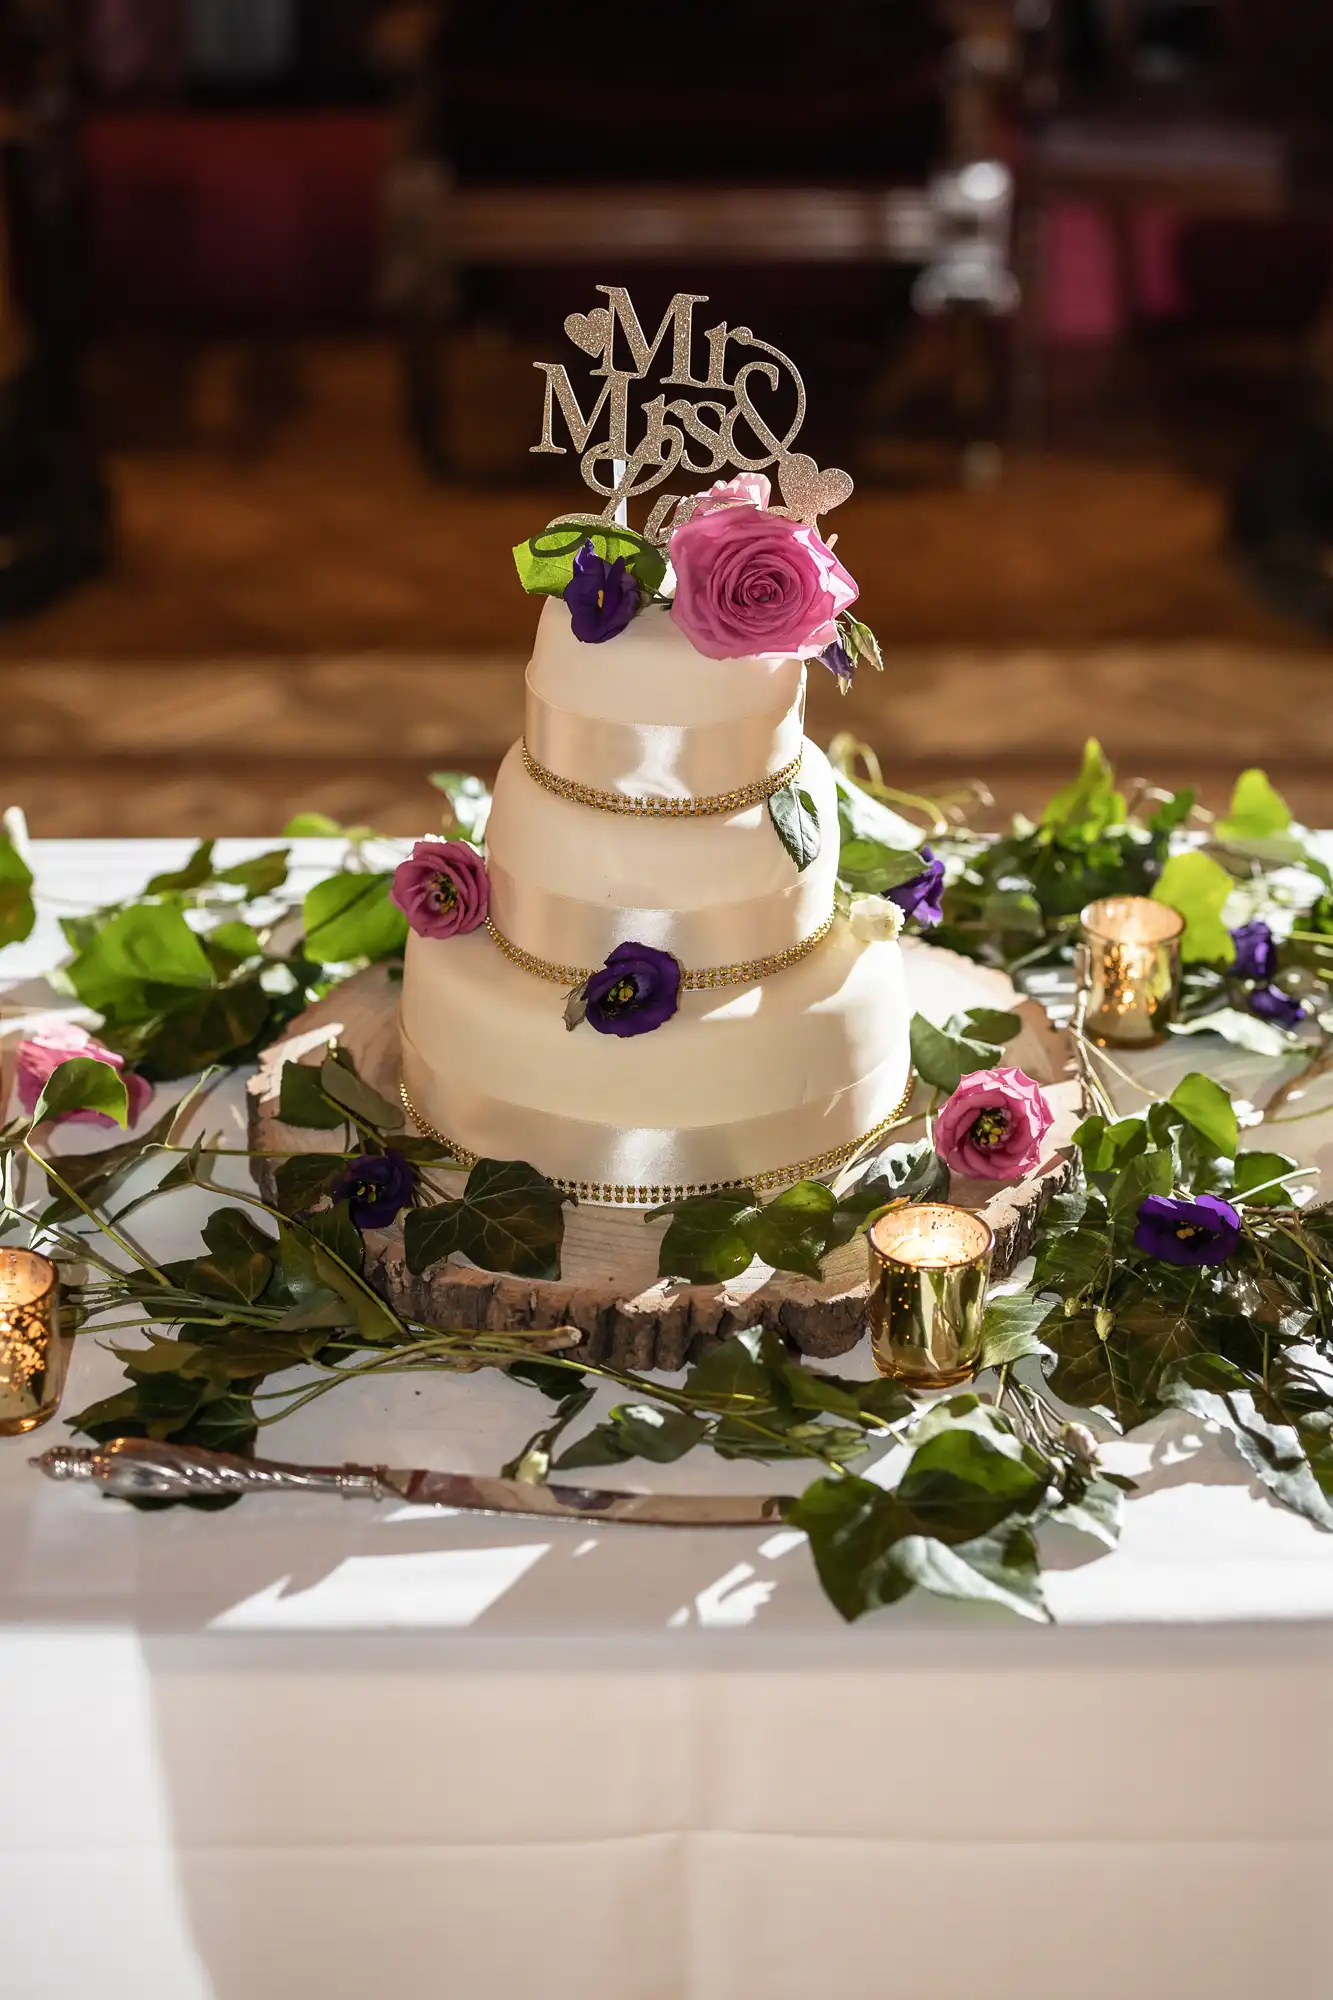 A three-tiered white wedding cake is decorated with purple flowers, greenery, and a "Mr & Mrs" topper. The cake is placed on a white table adorned with foliage and candles.